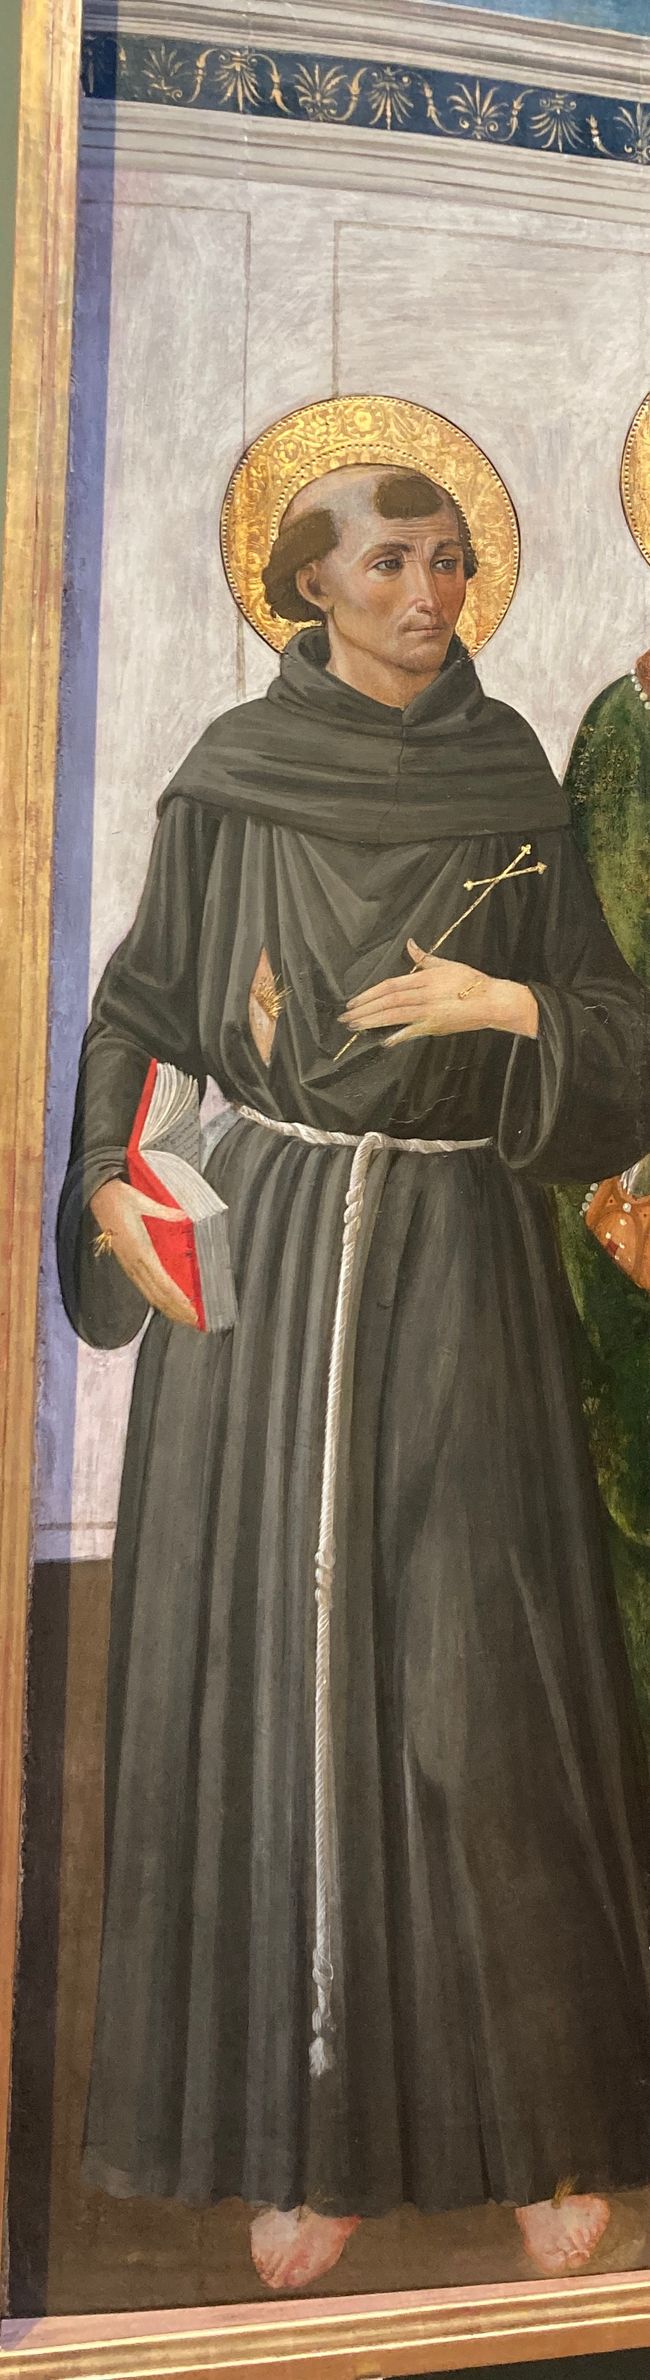 San Francesco with the wounds of Jesus